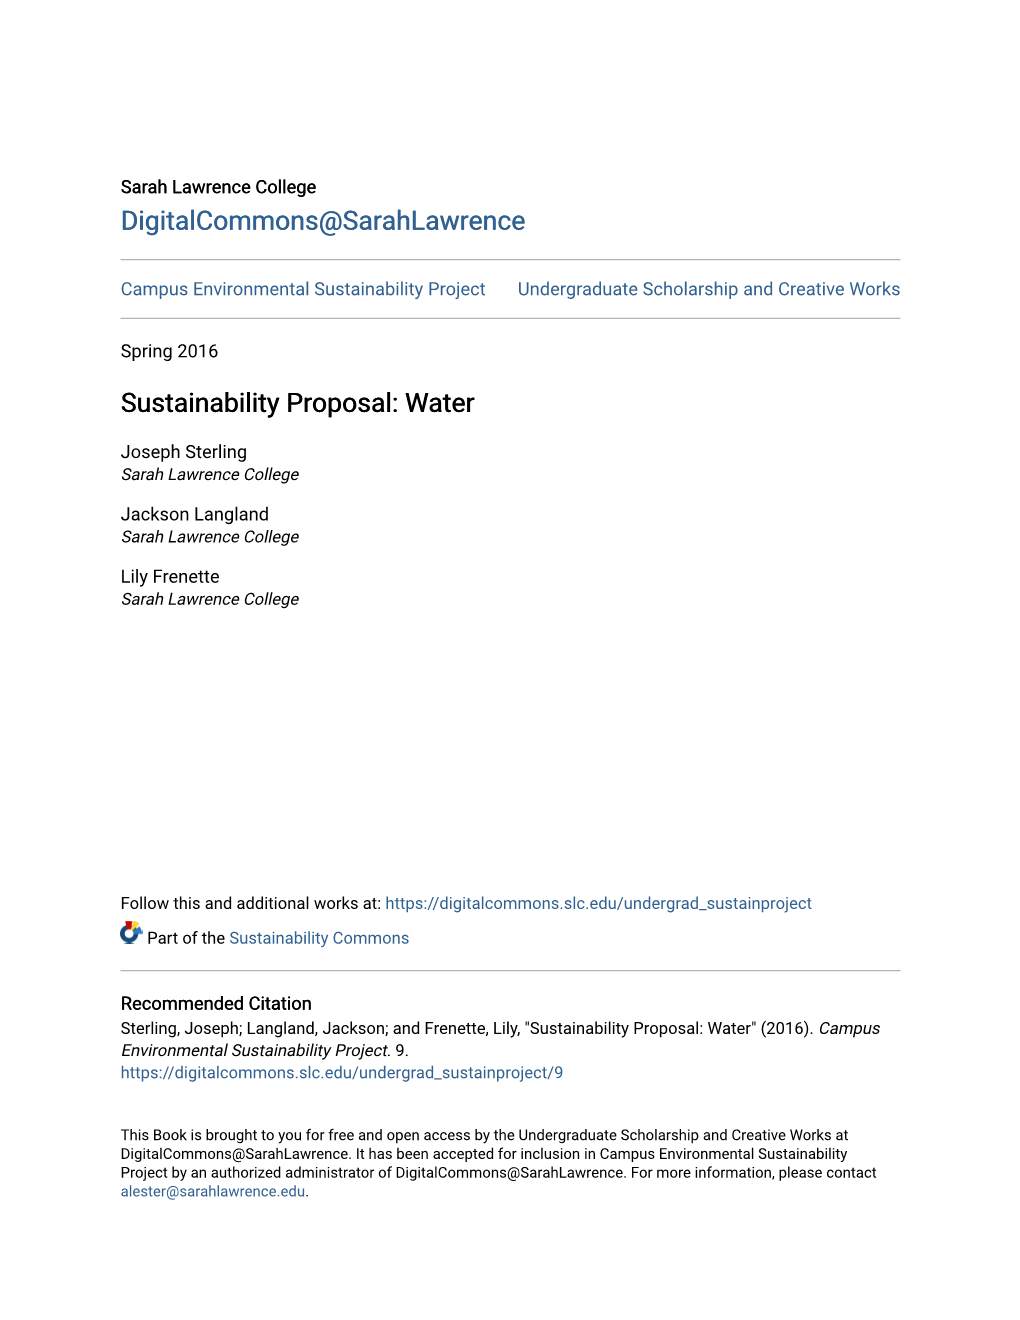 Sustainability Proposal: Water